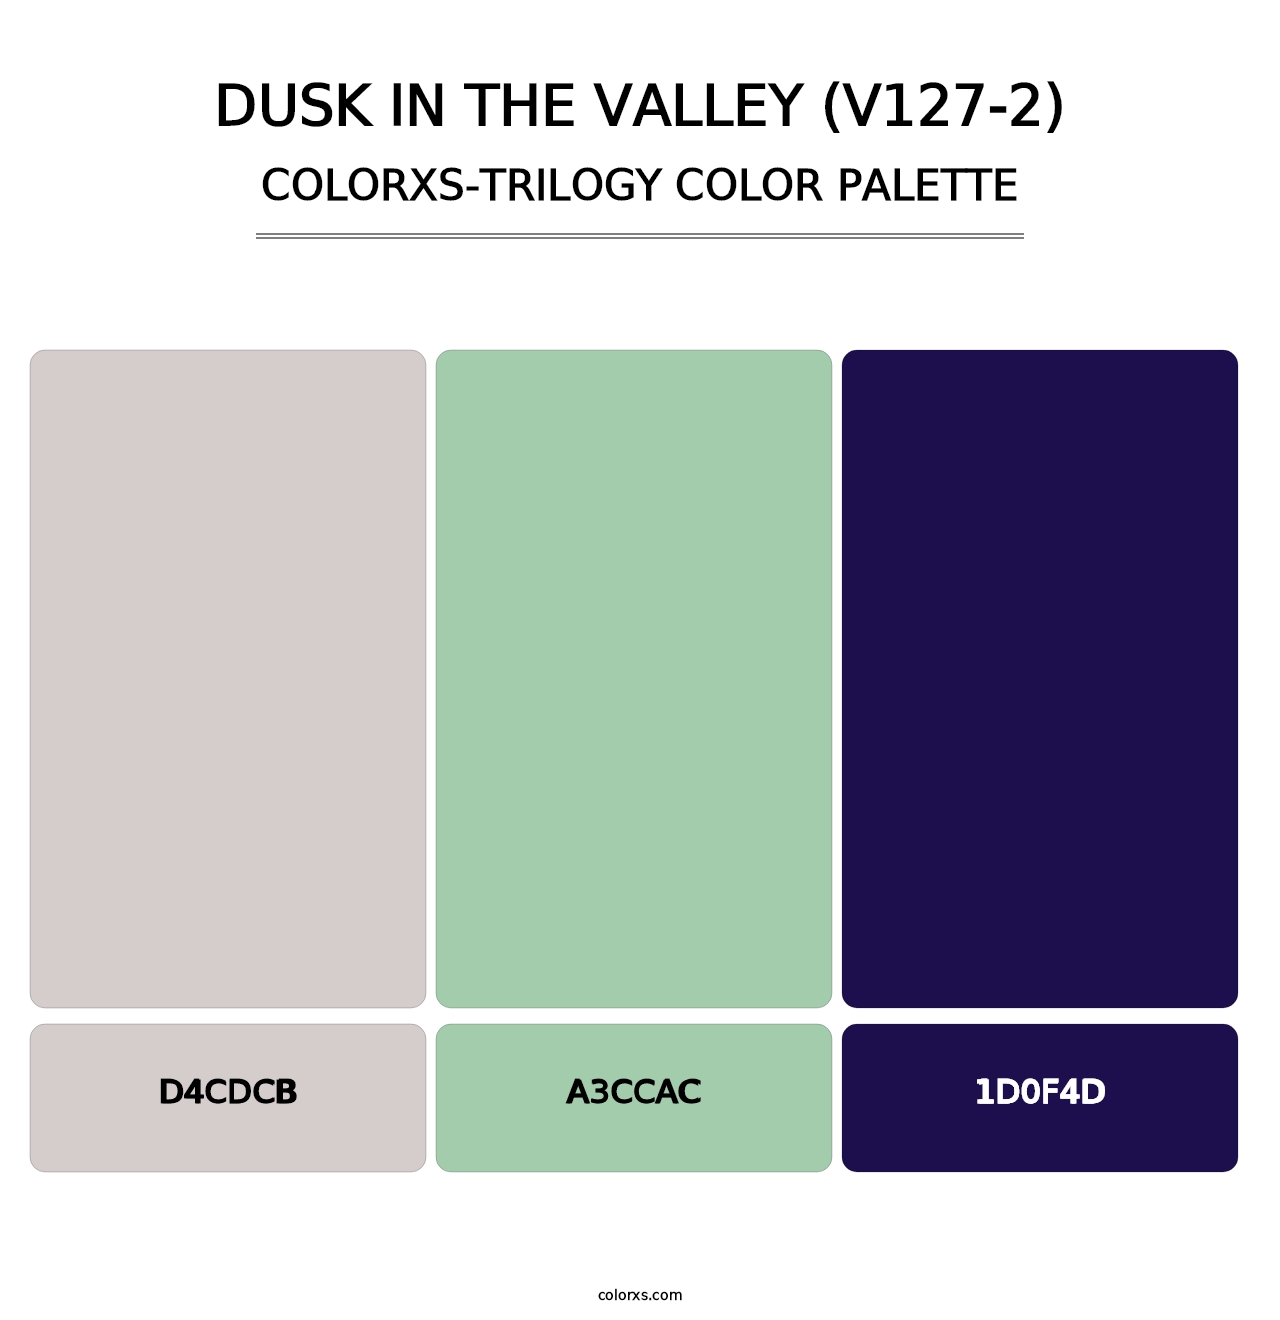 Dusk in the Valley (V127-2) - Colorxs Trilogy Palette